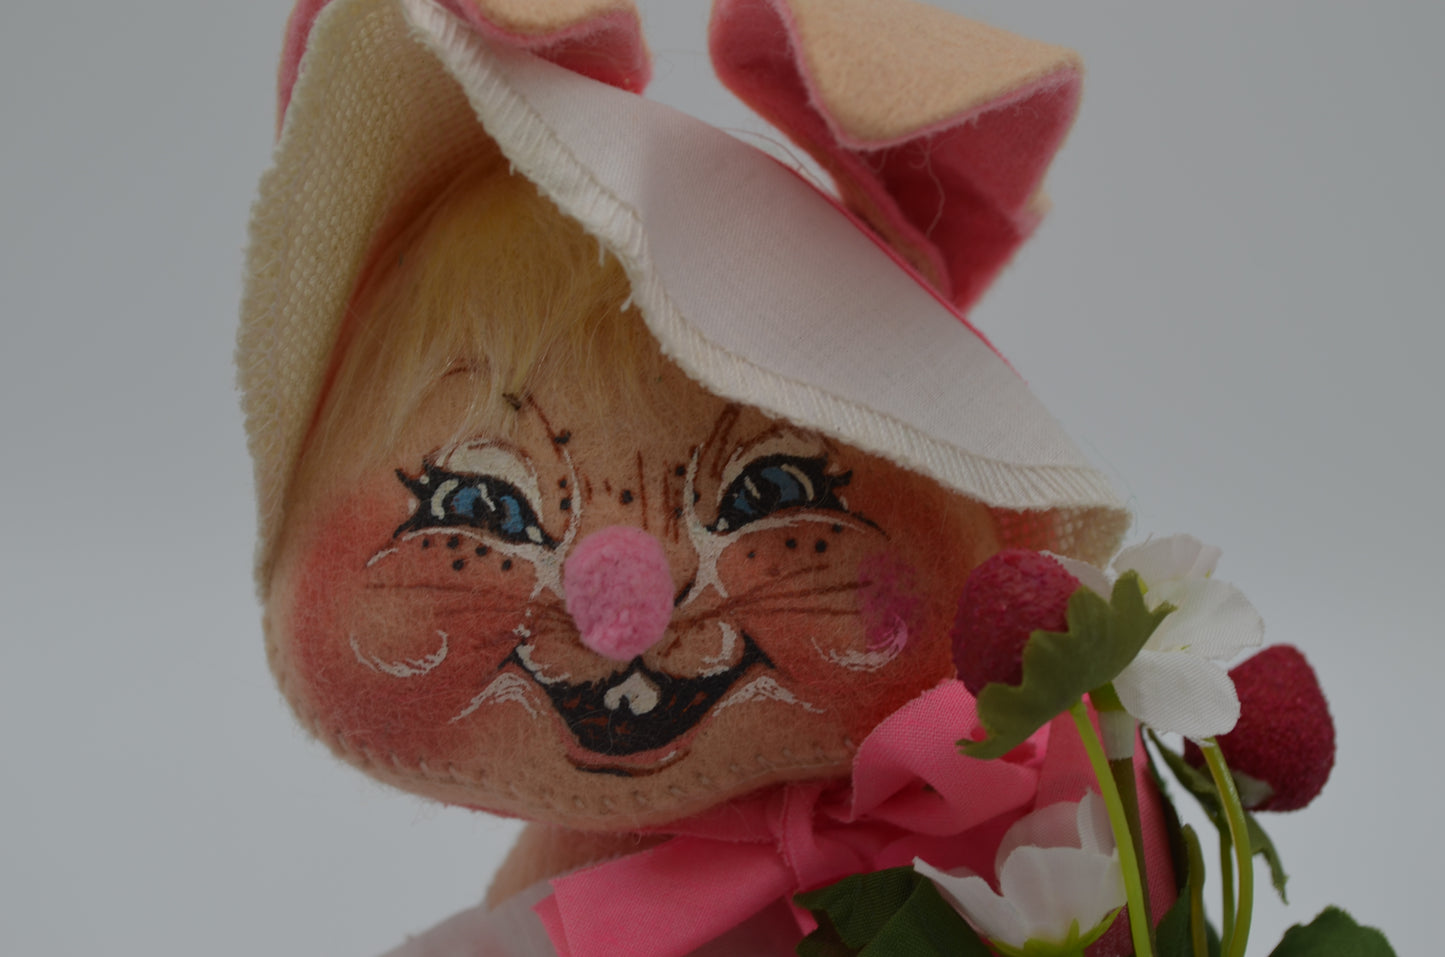 10" Country Girl Bunny with Flowers 065089 Annalee